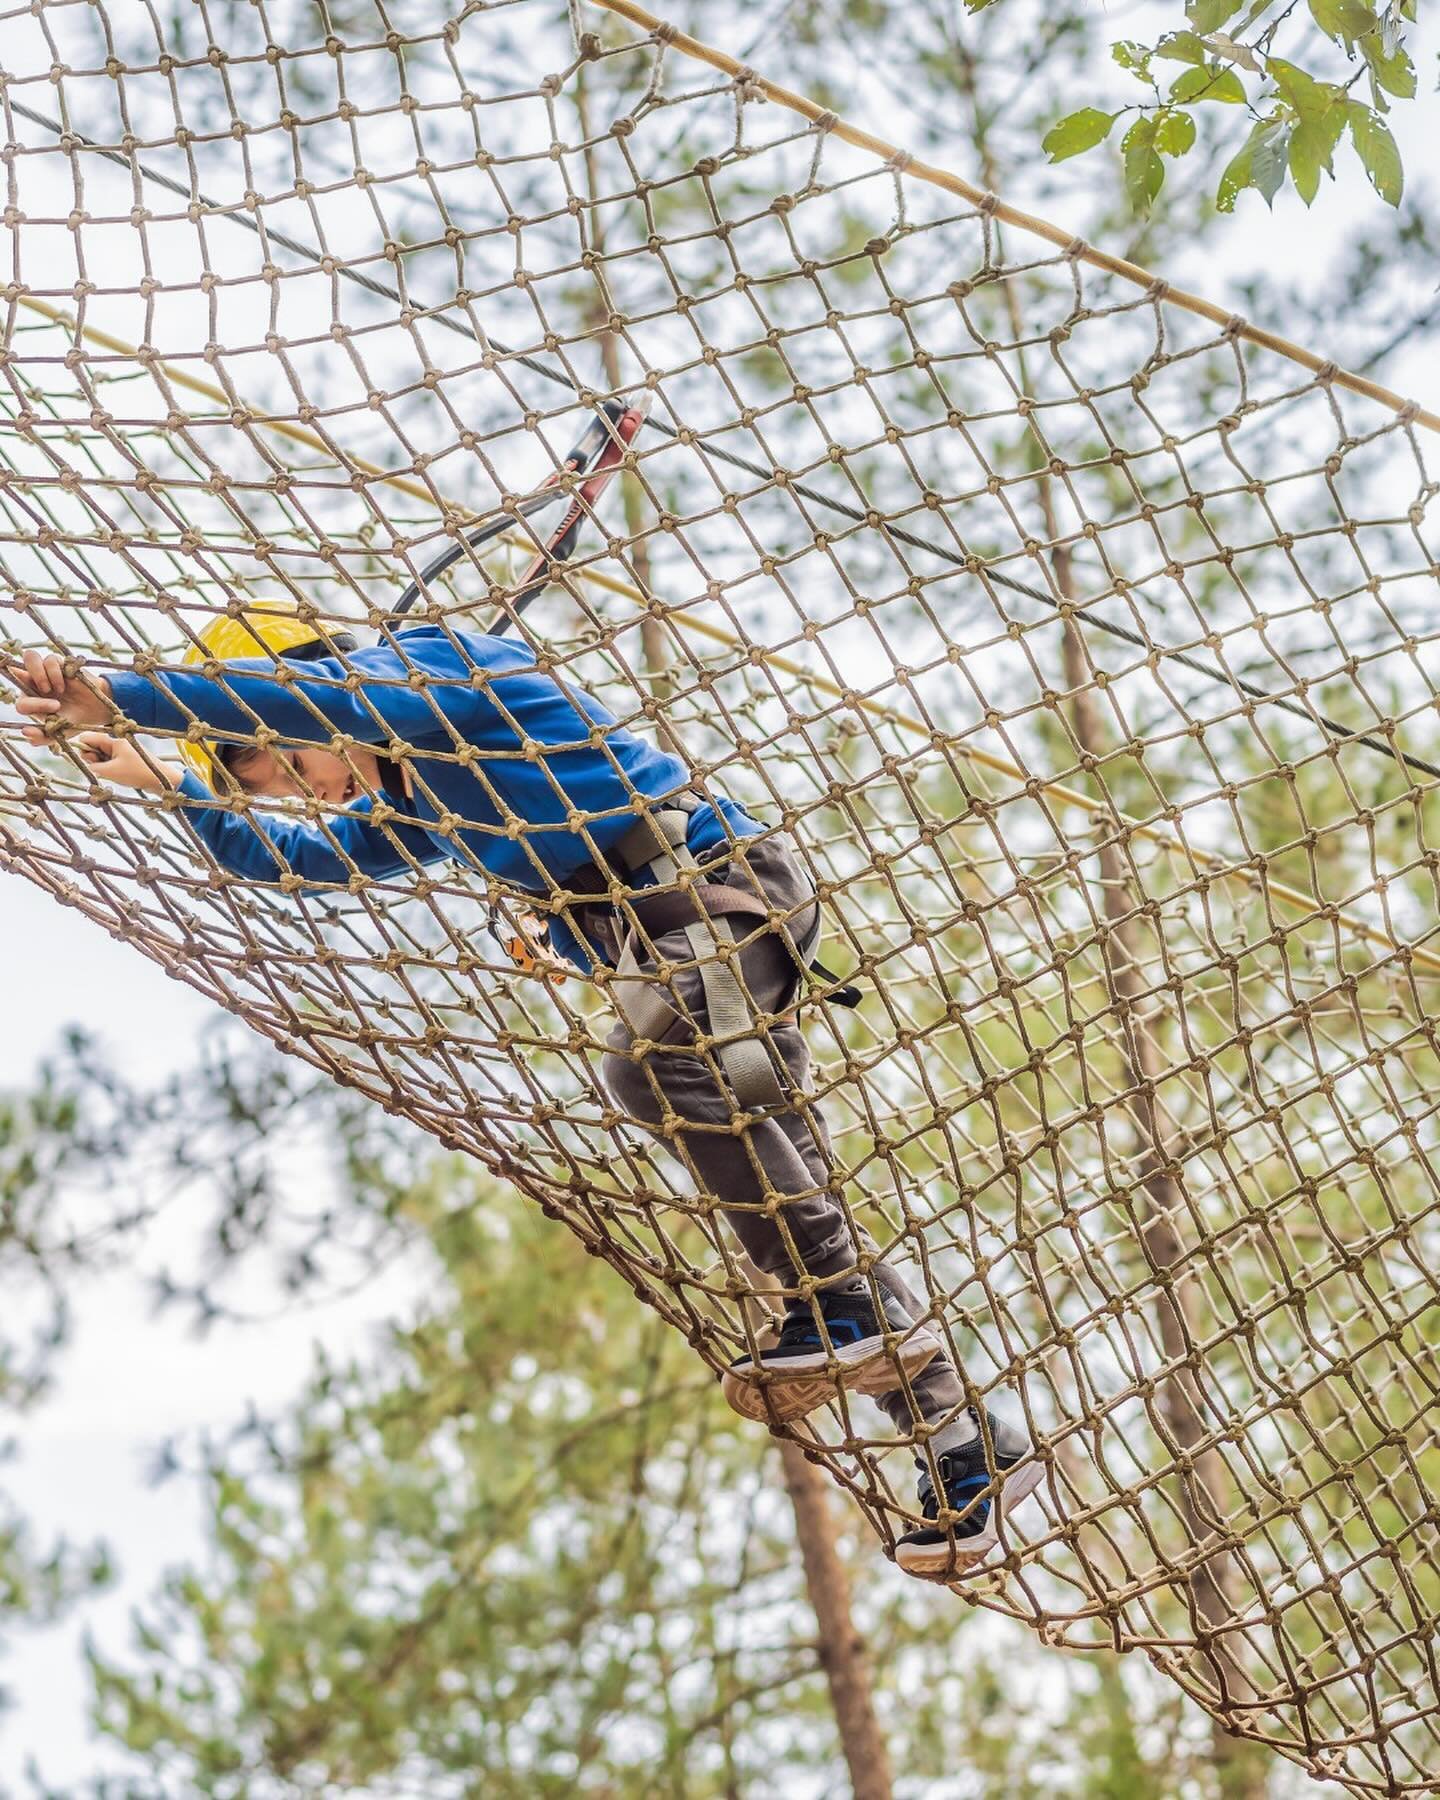 Canyon Ski Resort is opening a brand new summer attraction just ninety minutes from Calgary this summer. The treetop adventure park will feature a whole lot of fun and a 500-foot zipline! You&rsquo;re going to want to add this one to your summer buck